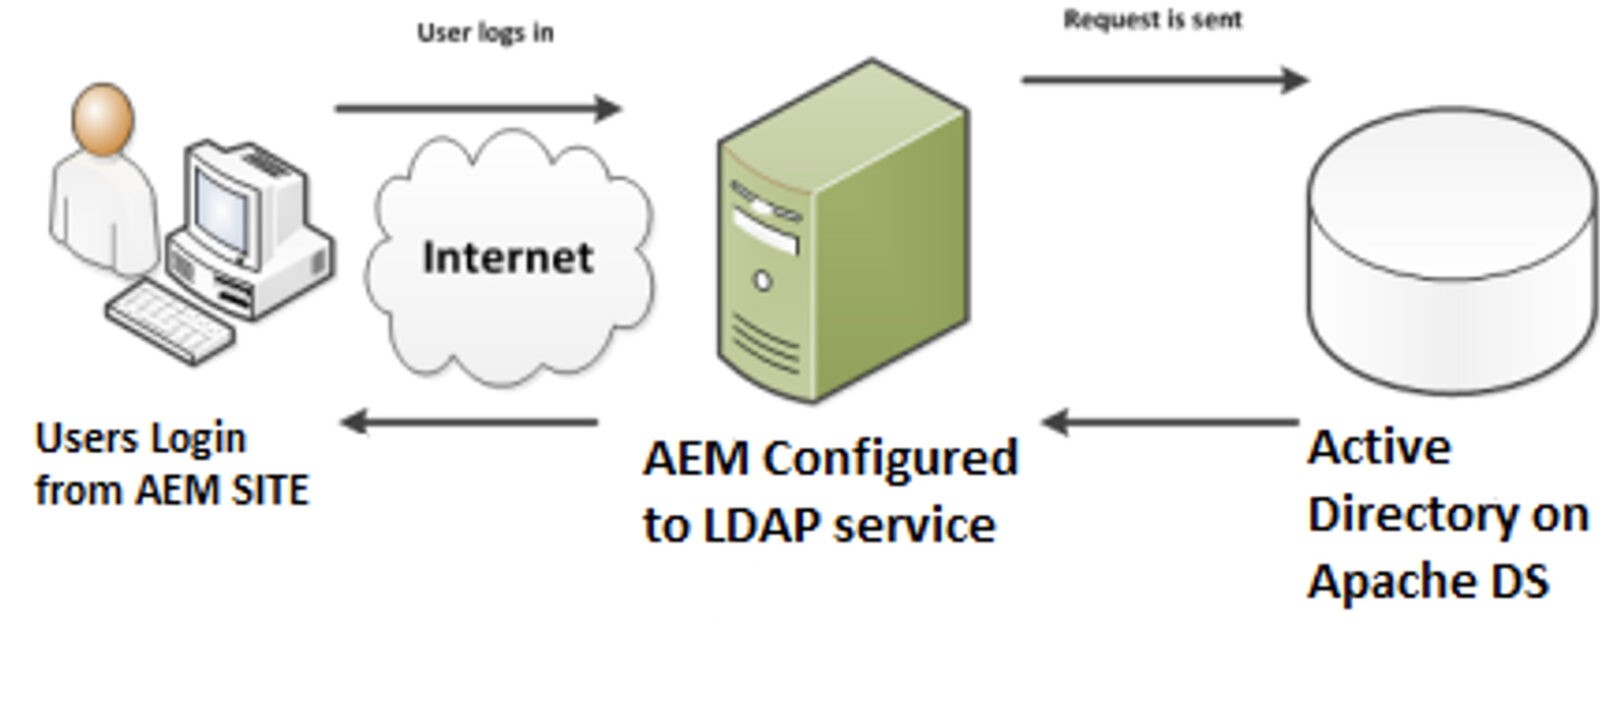 Custom Integration of AEM with Active Directory (AD)